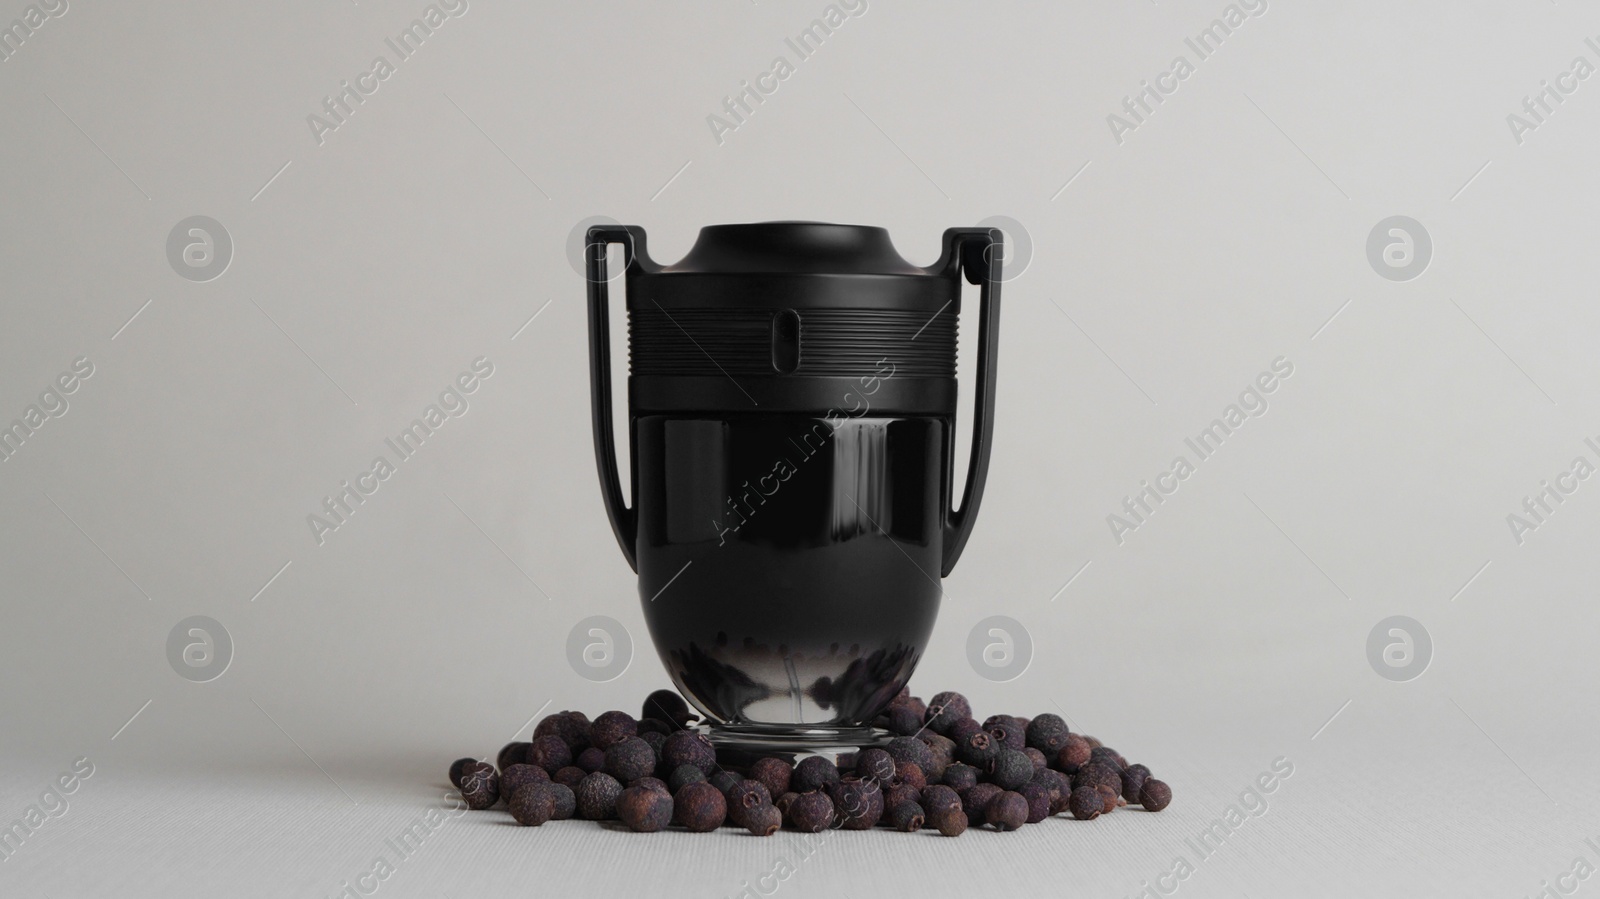 Photo of Bottle of luxurious perfume and spice on light grey background